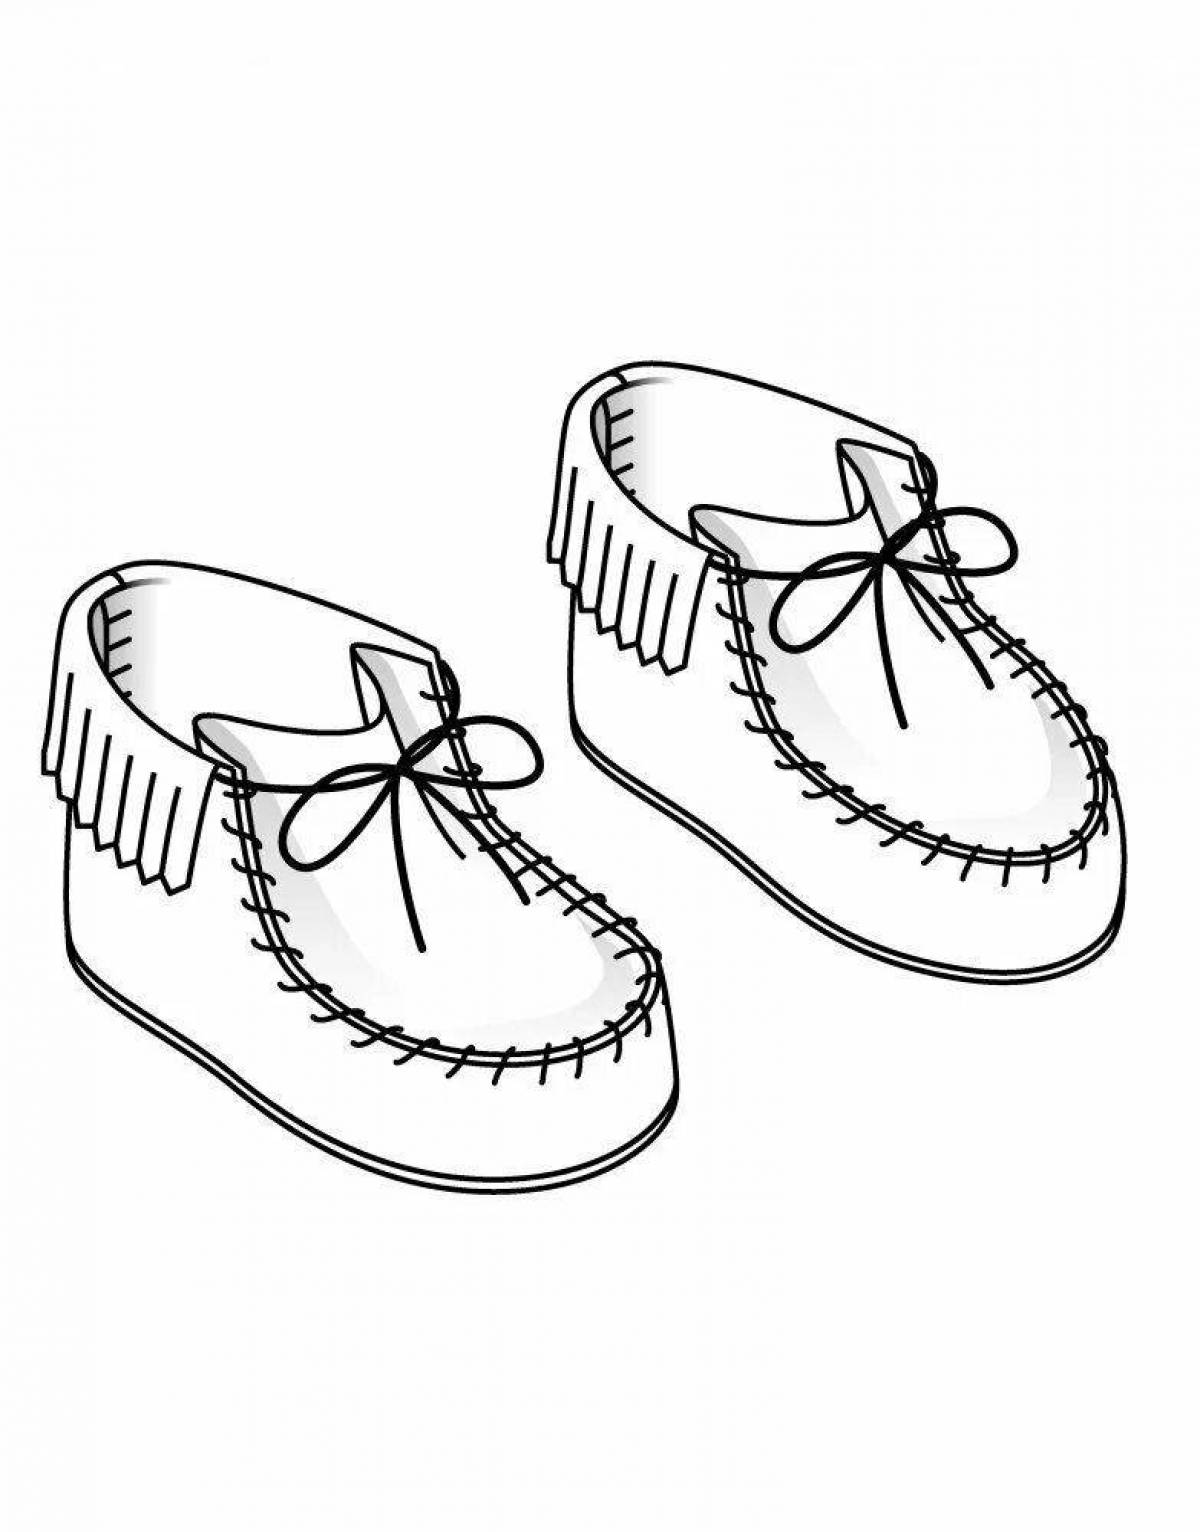 Awesome shoe coloring pages for 3-4 year olds